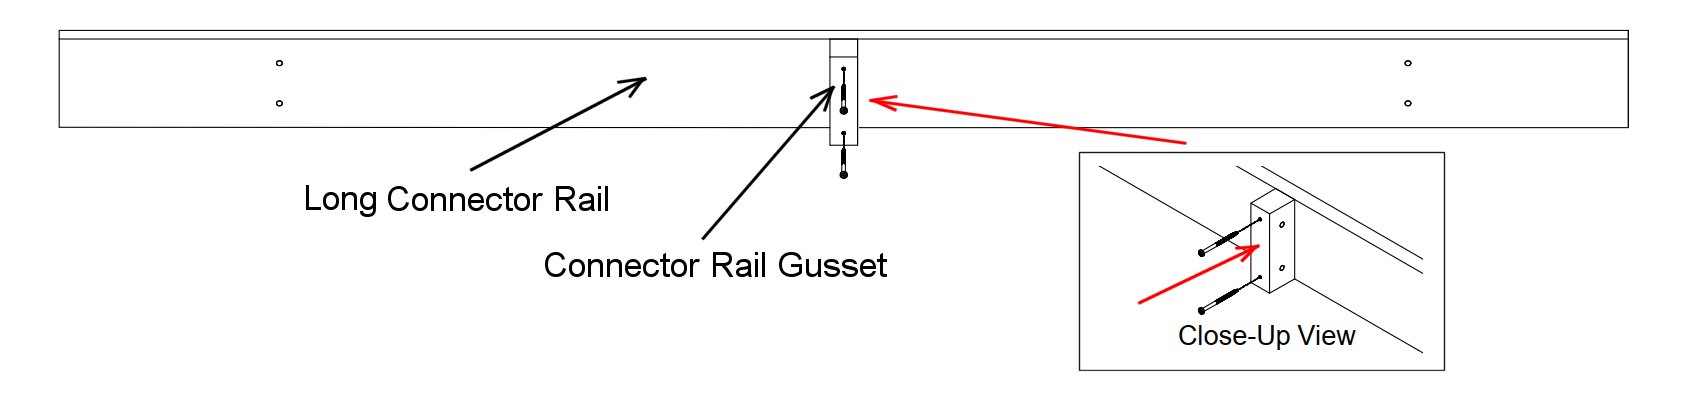 Attach The Connector Rail Gussets To The Long Connector Rails